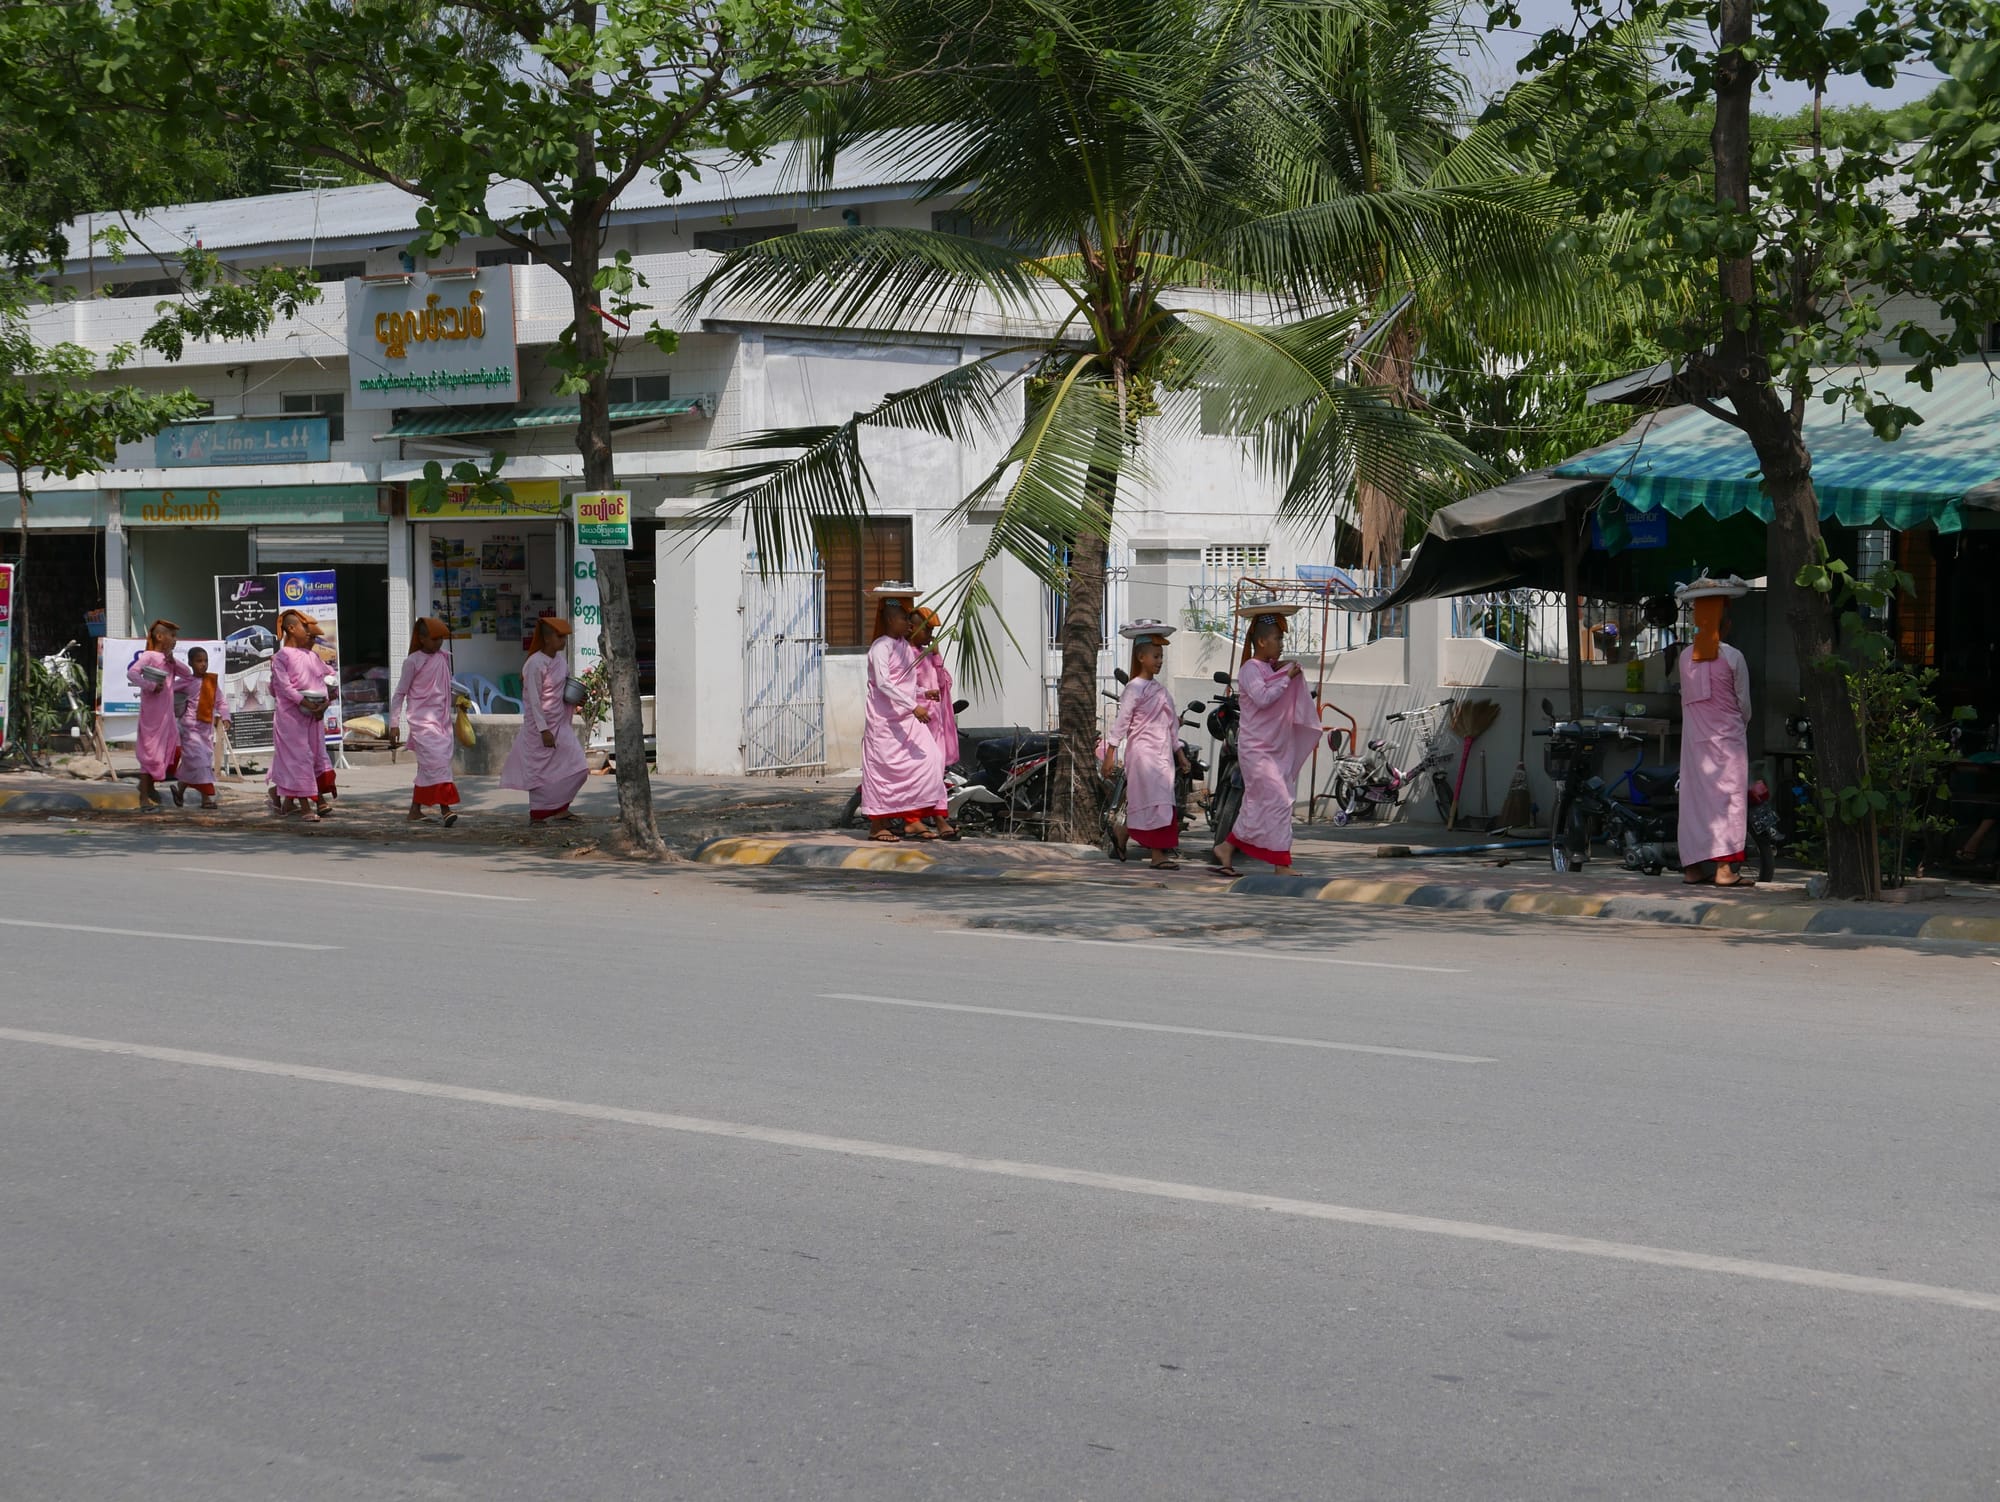 Photo by Author — “pink nuns” in Mandalay